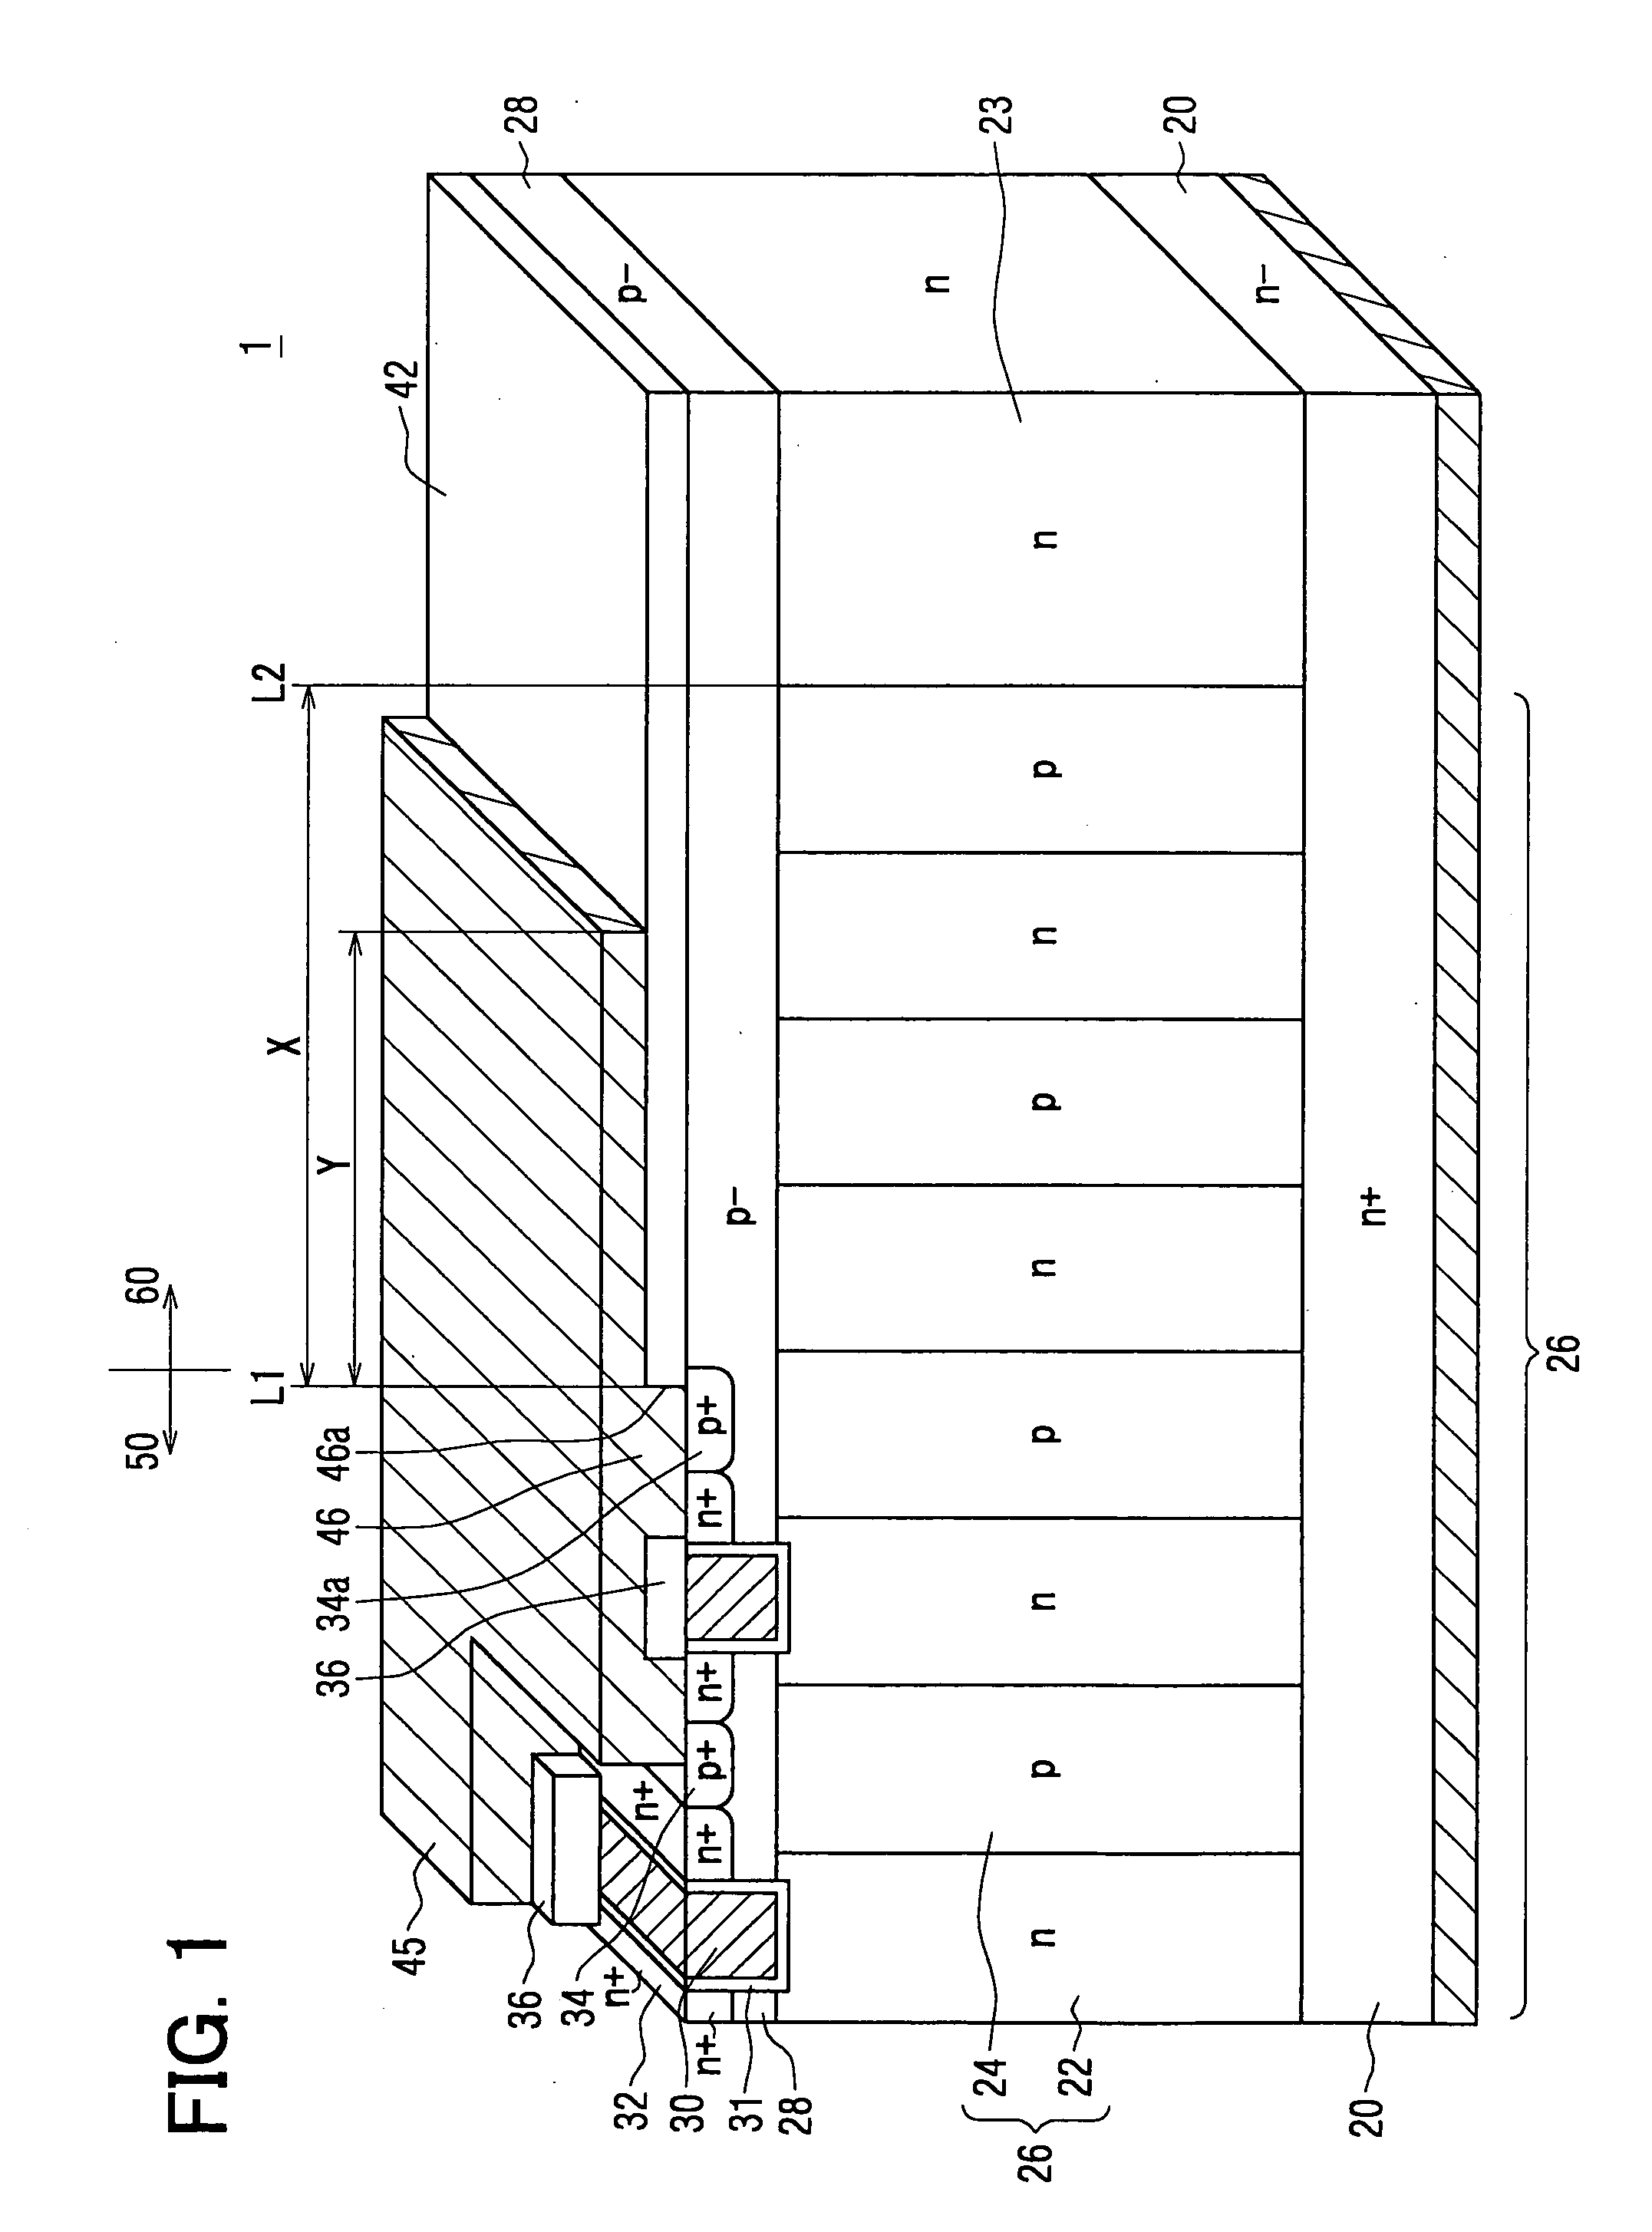 Semiconductor device having periodic construction